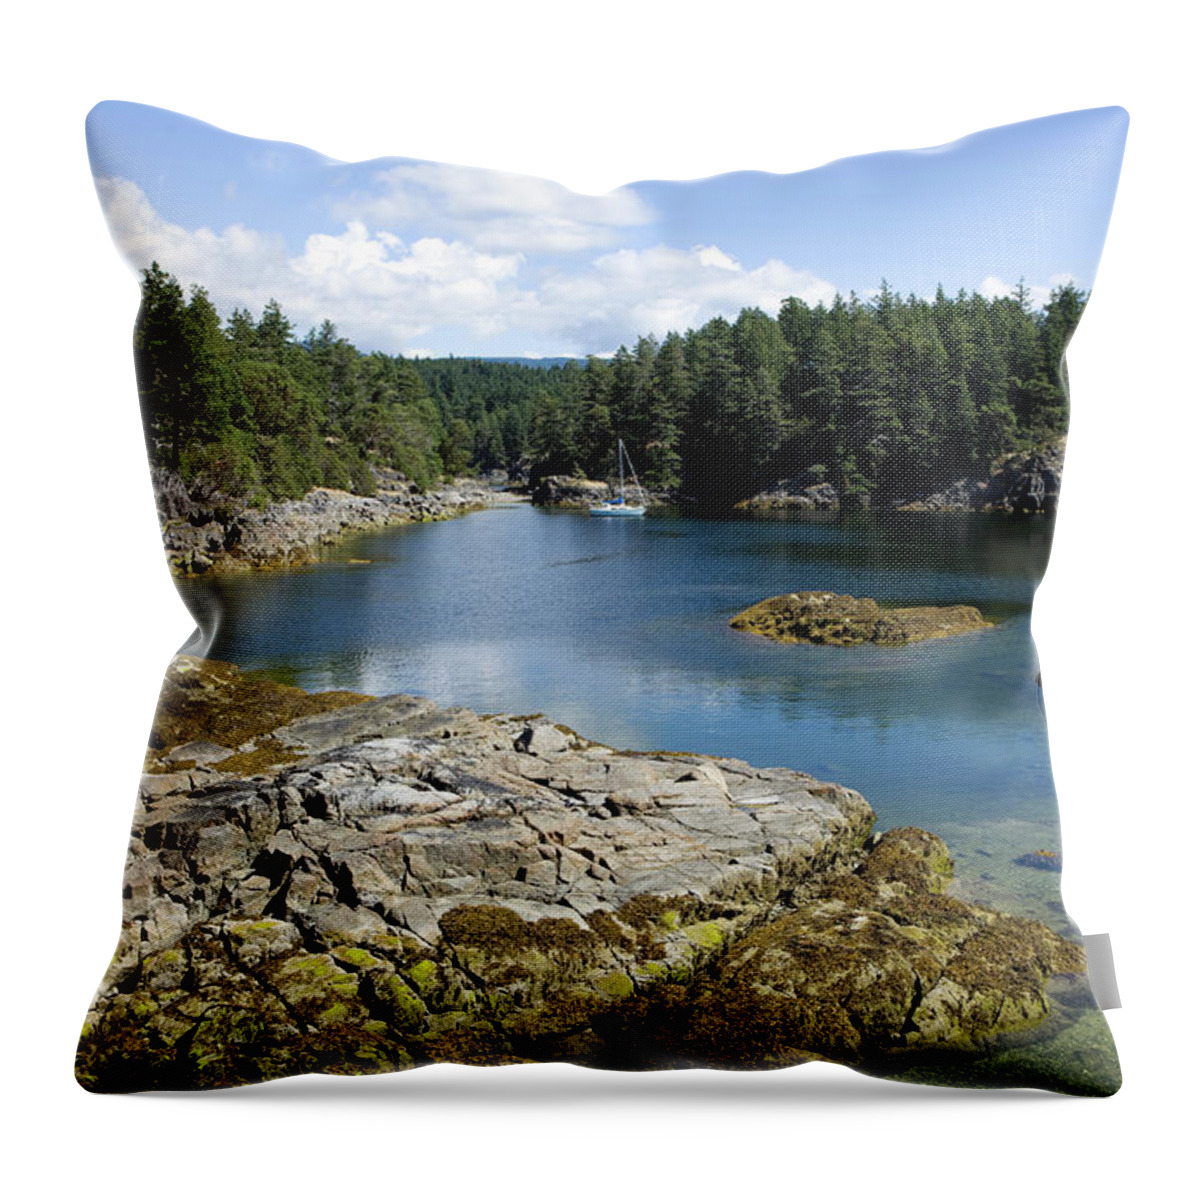 Water's Edge Throw Pillow featuring the photograph Smuggler Cove Marine Provincial Park by Laughingmango